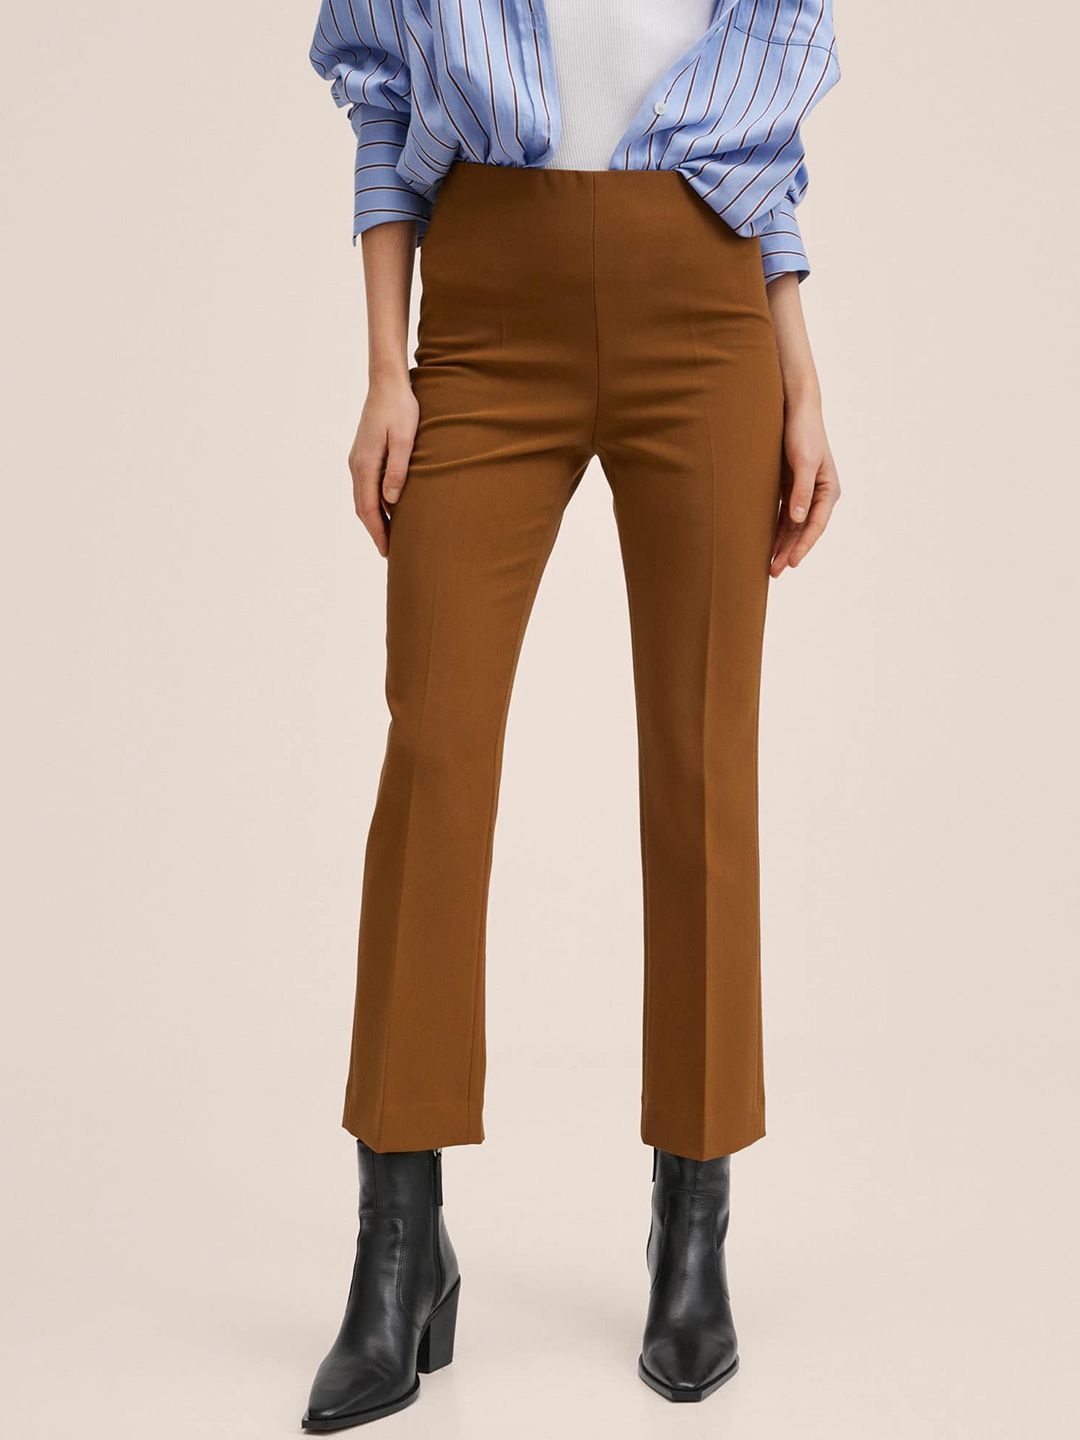 MANGO Women Mustard Brown Solid Trousers Price in India